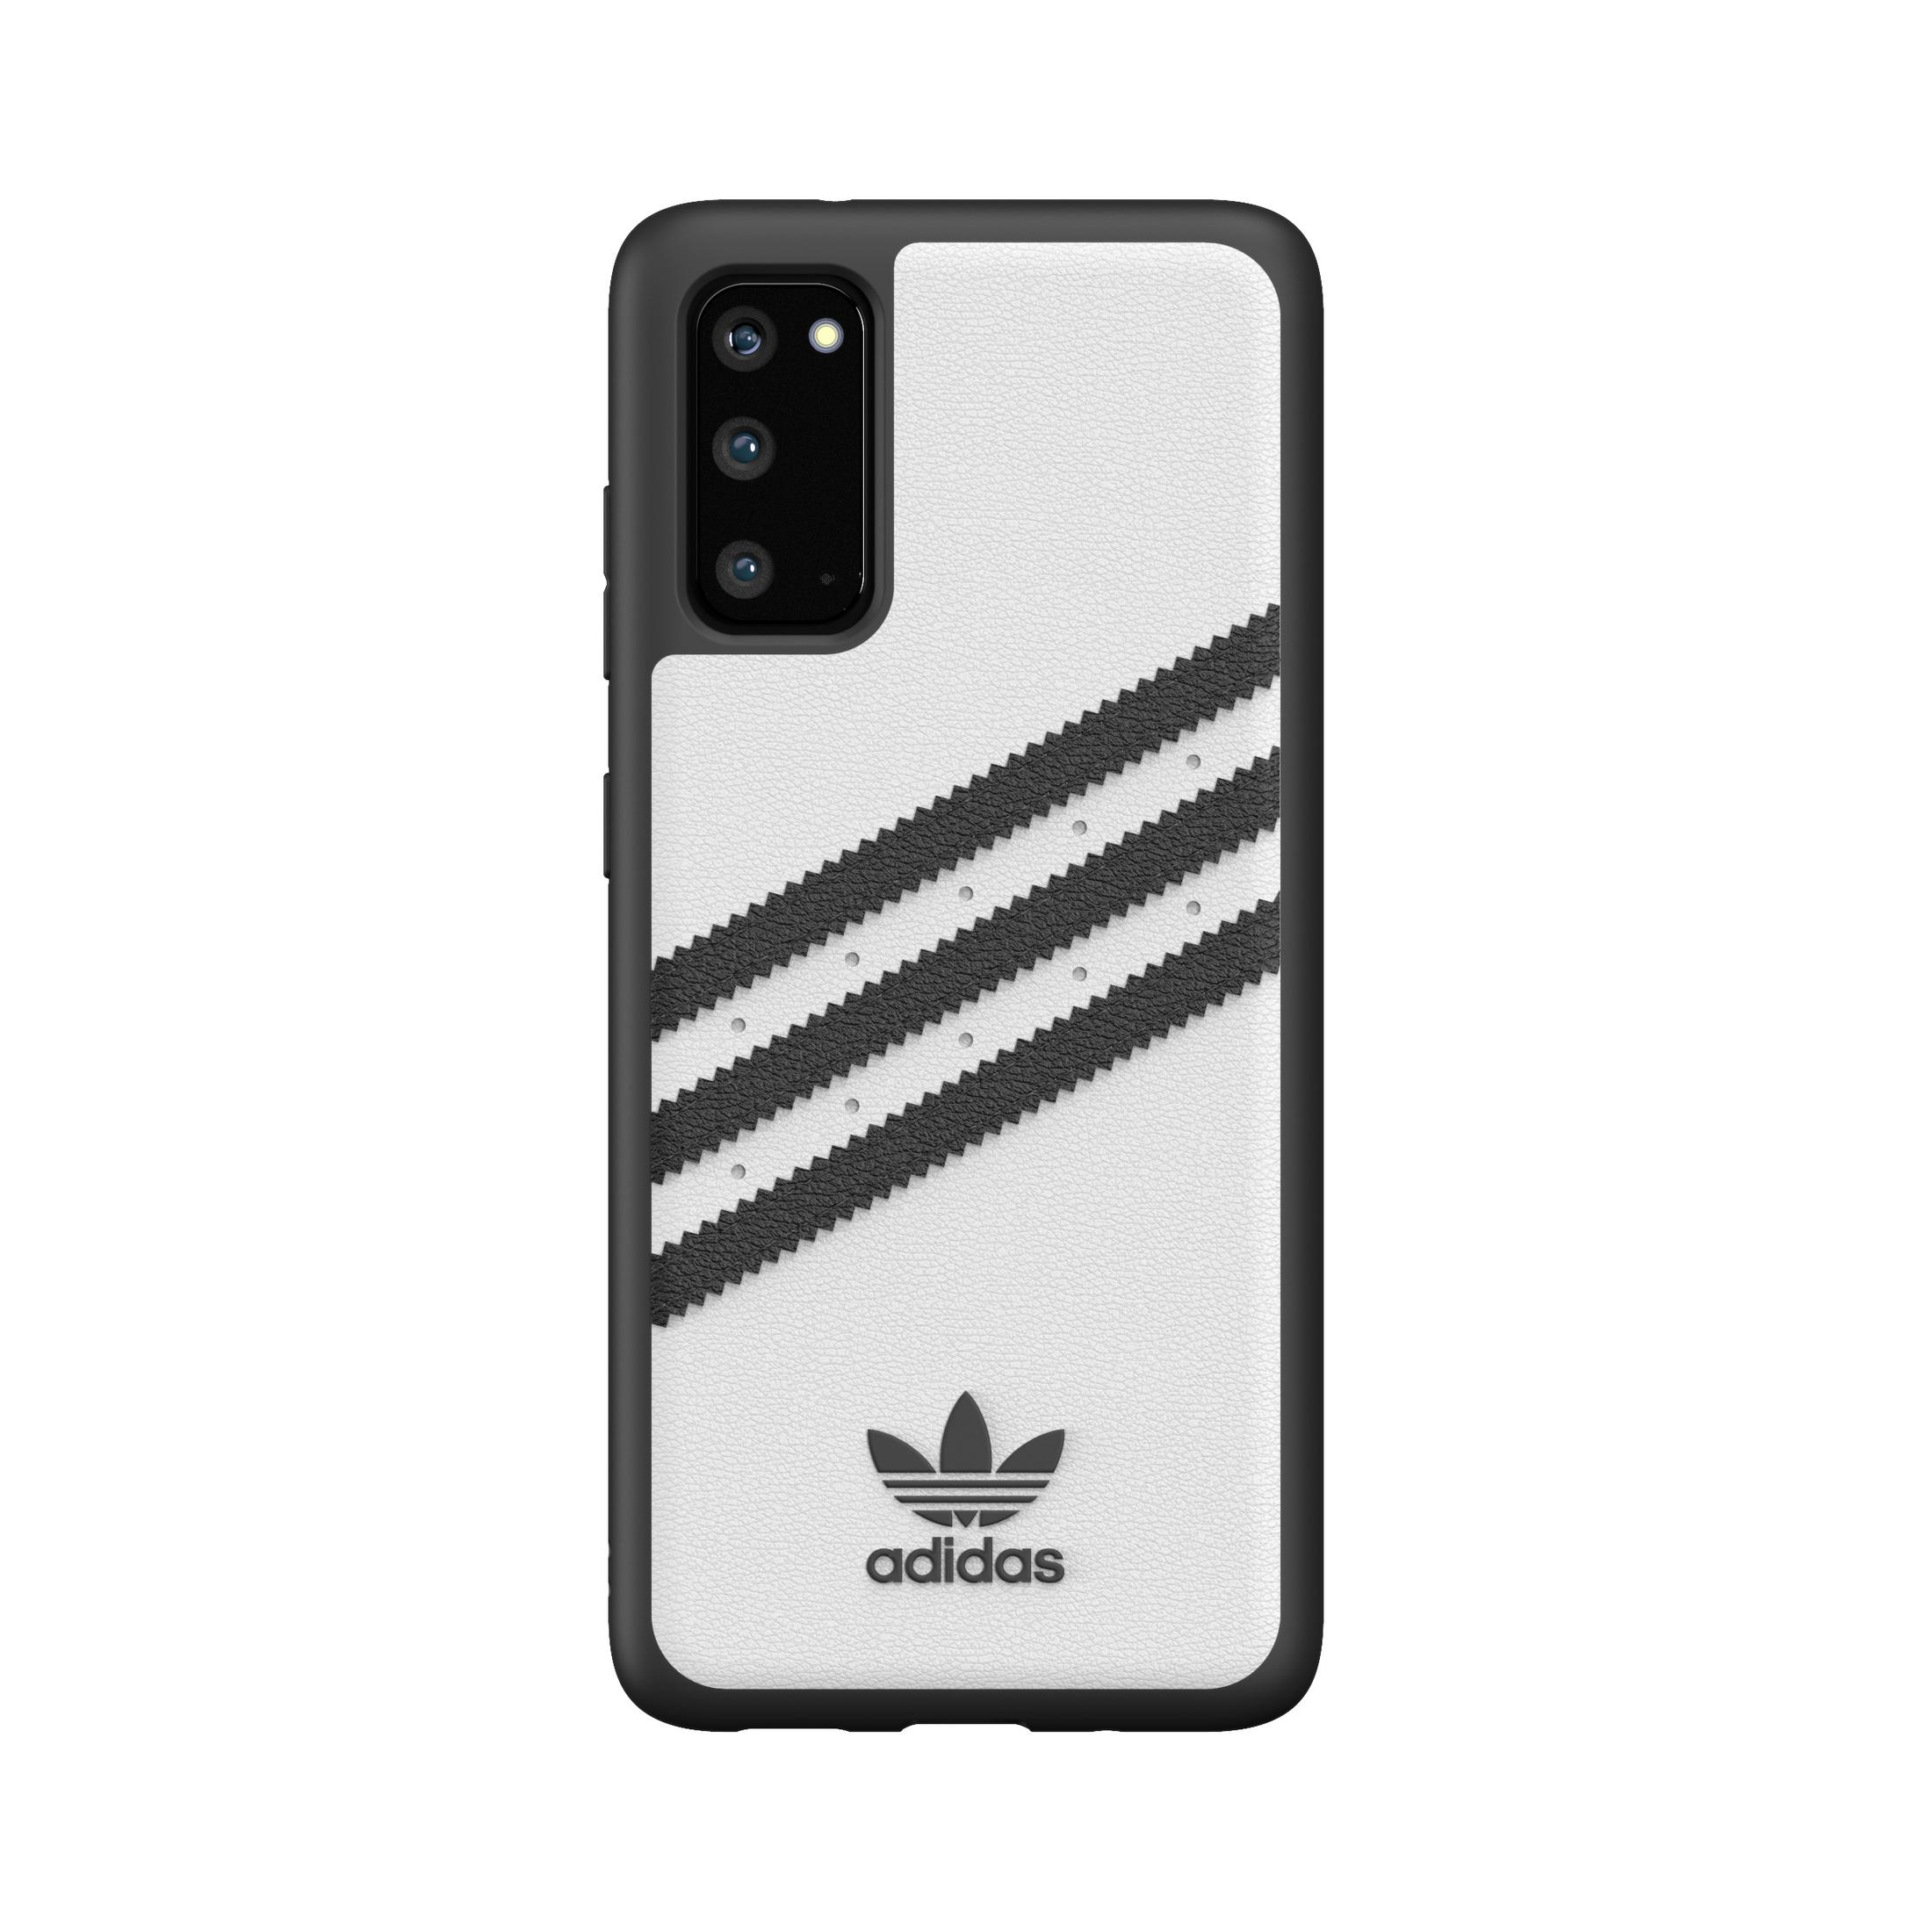 S20, ADIDAS PU, WHITE SAMSUNG, case Backcover, Moulded GALAXY